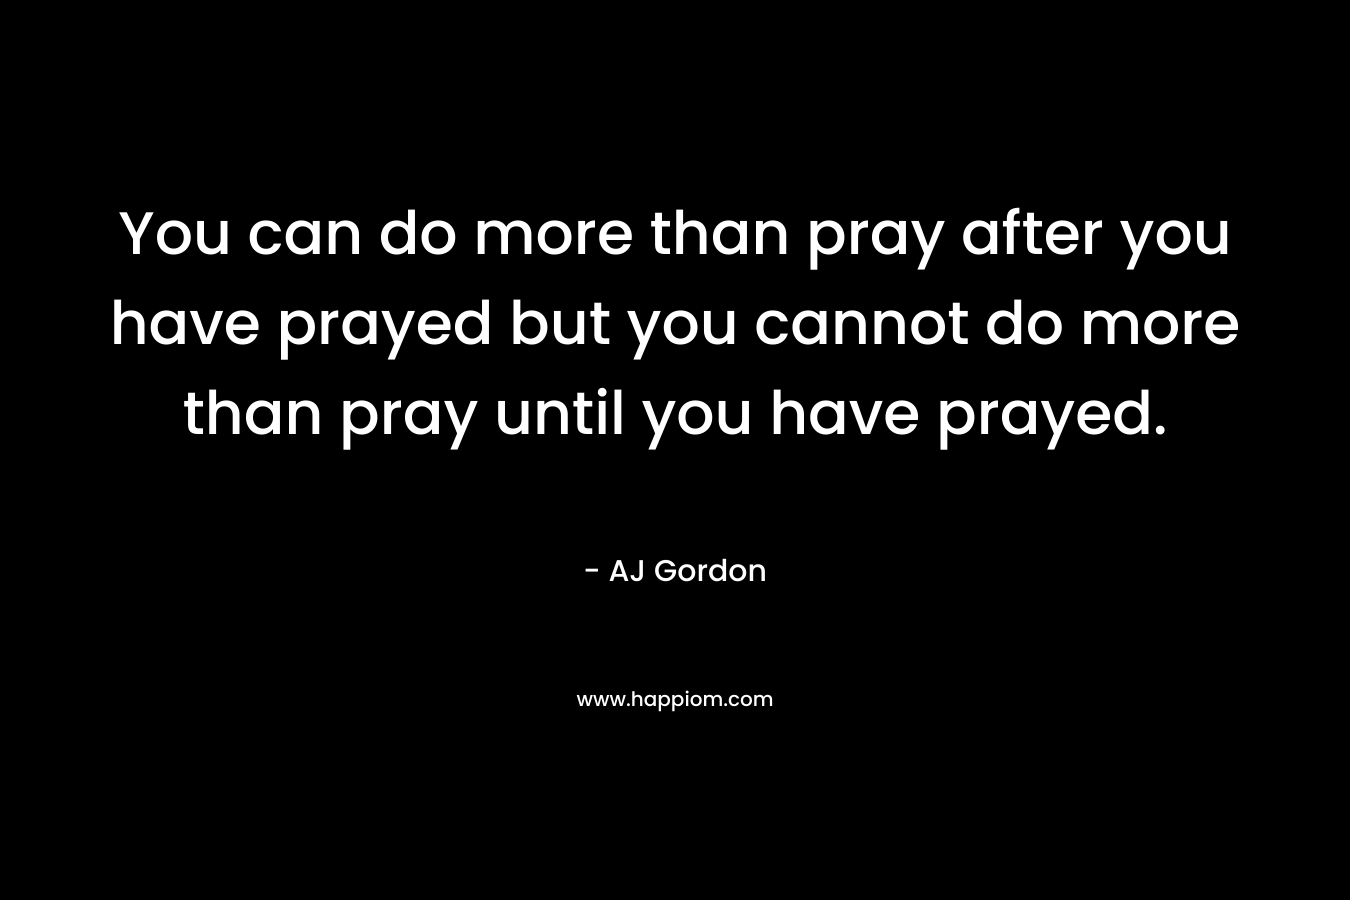 You can do more than pray after you have prayed but you cannot do more than pray until you have prayed.